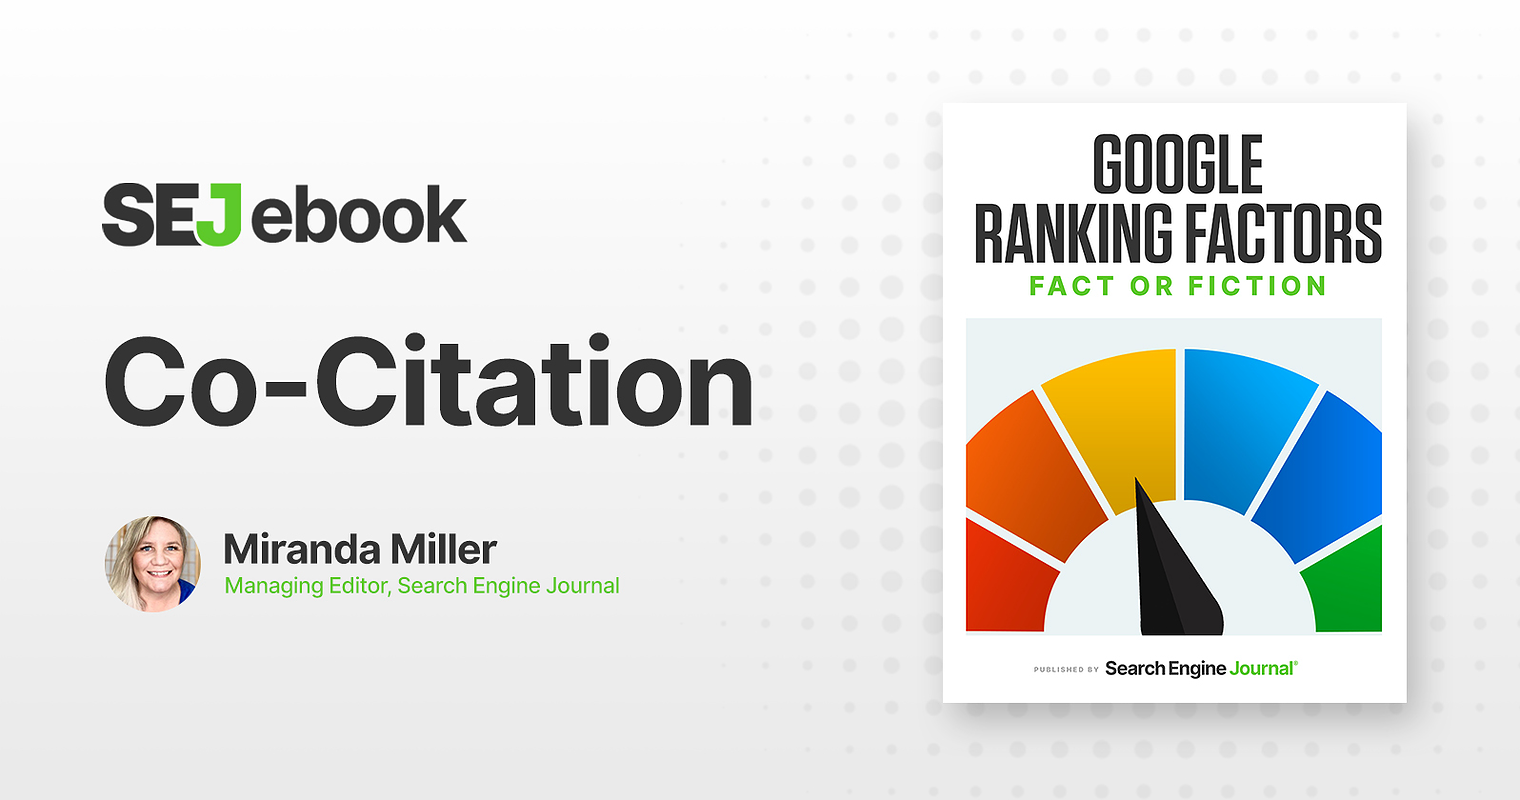 Is Co-Citation A Google Ranking Factor?